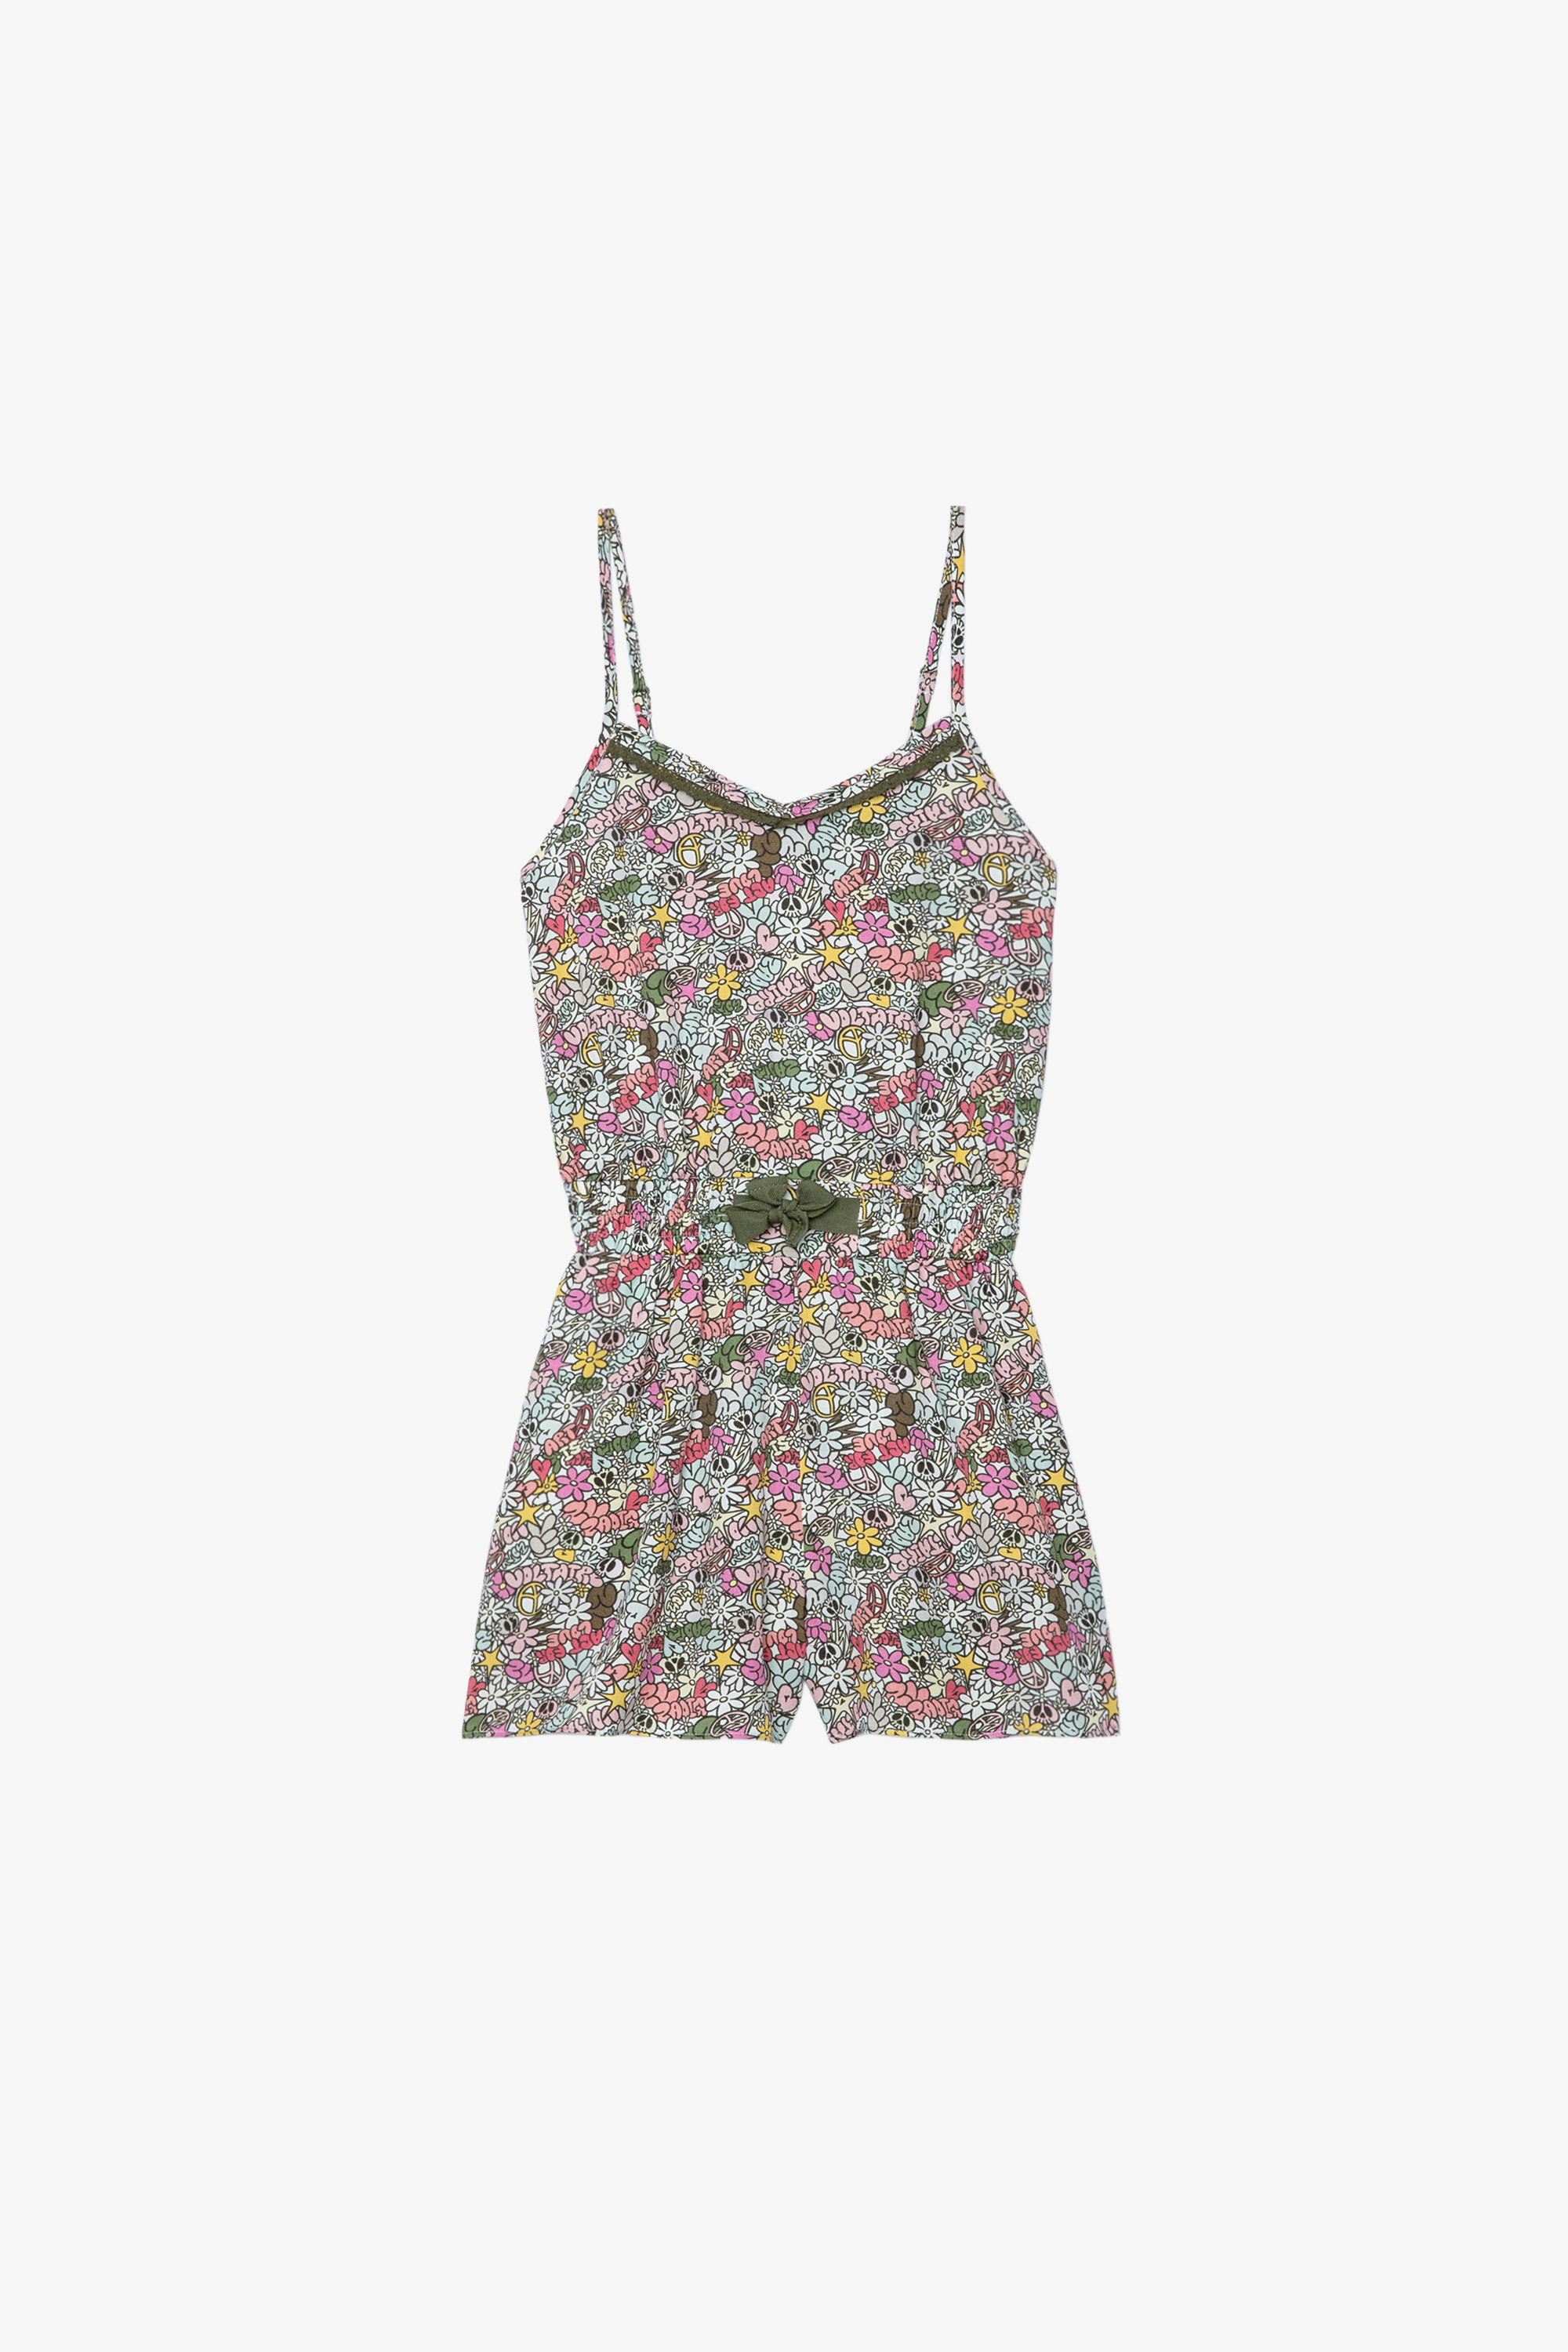 Barbara Kids' Playsuit Kids’ Core Cho print playsuit with lace-trimmed spaghetti straps